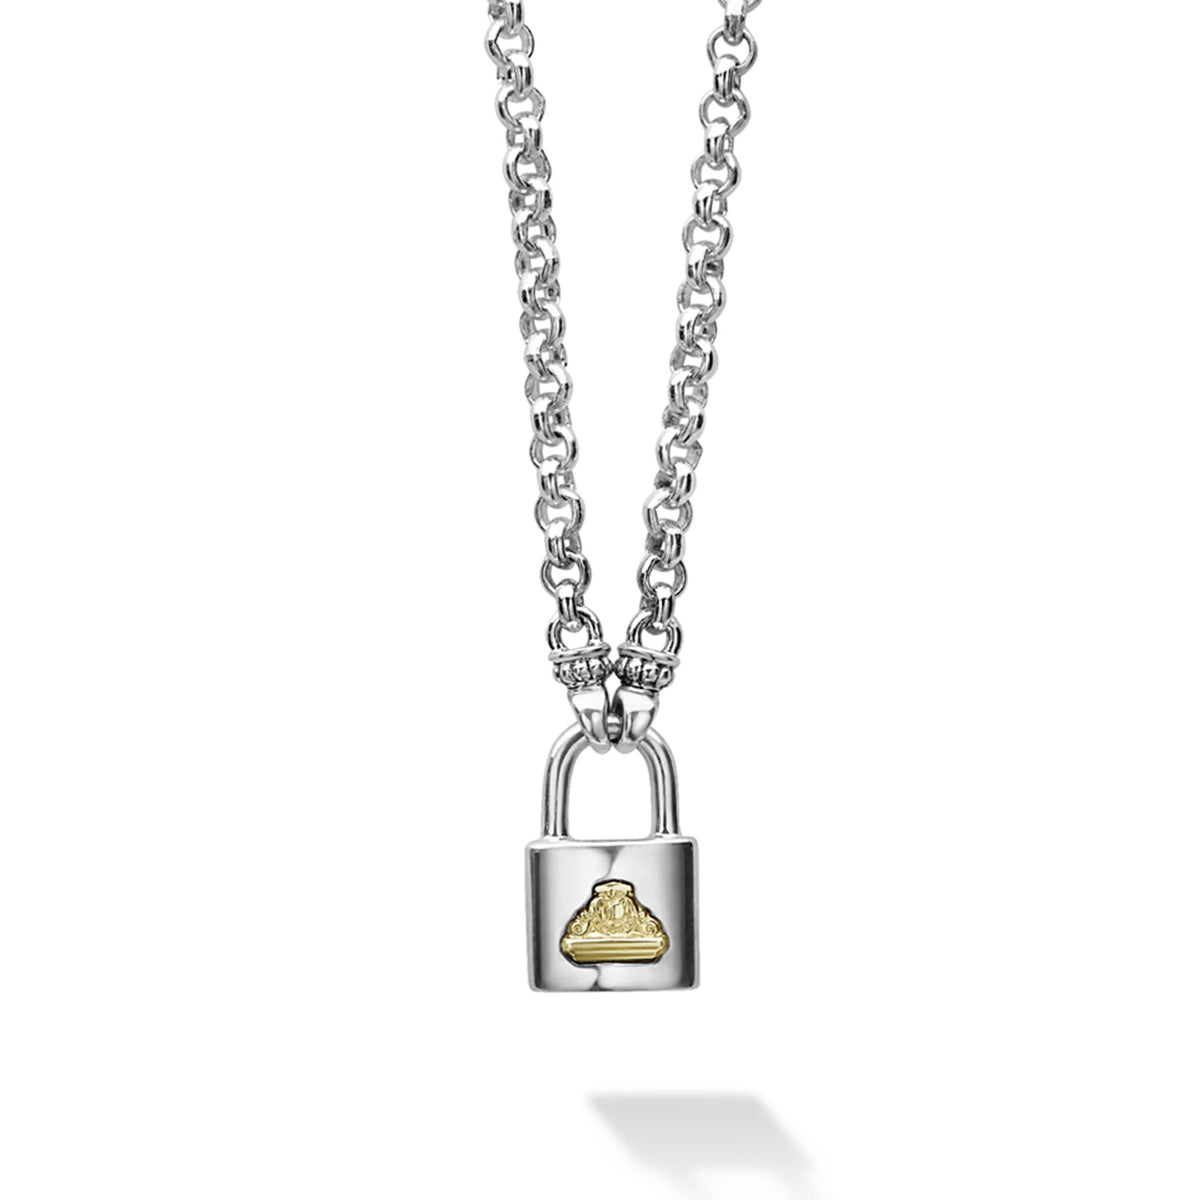 LOUIS VUITTON Sterling Silver Lockit Necklace 691345